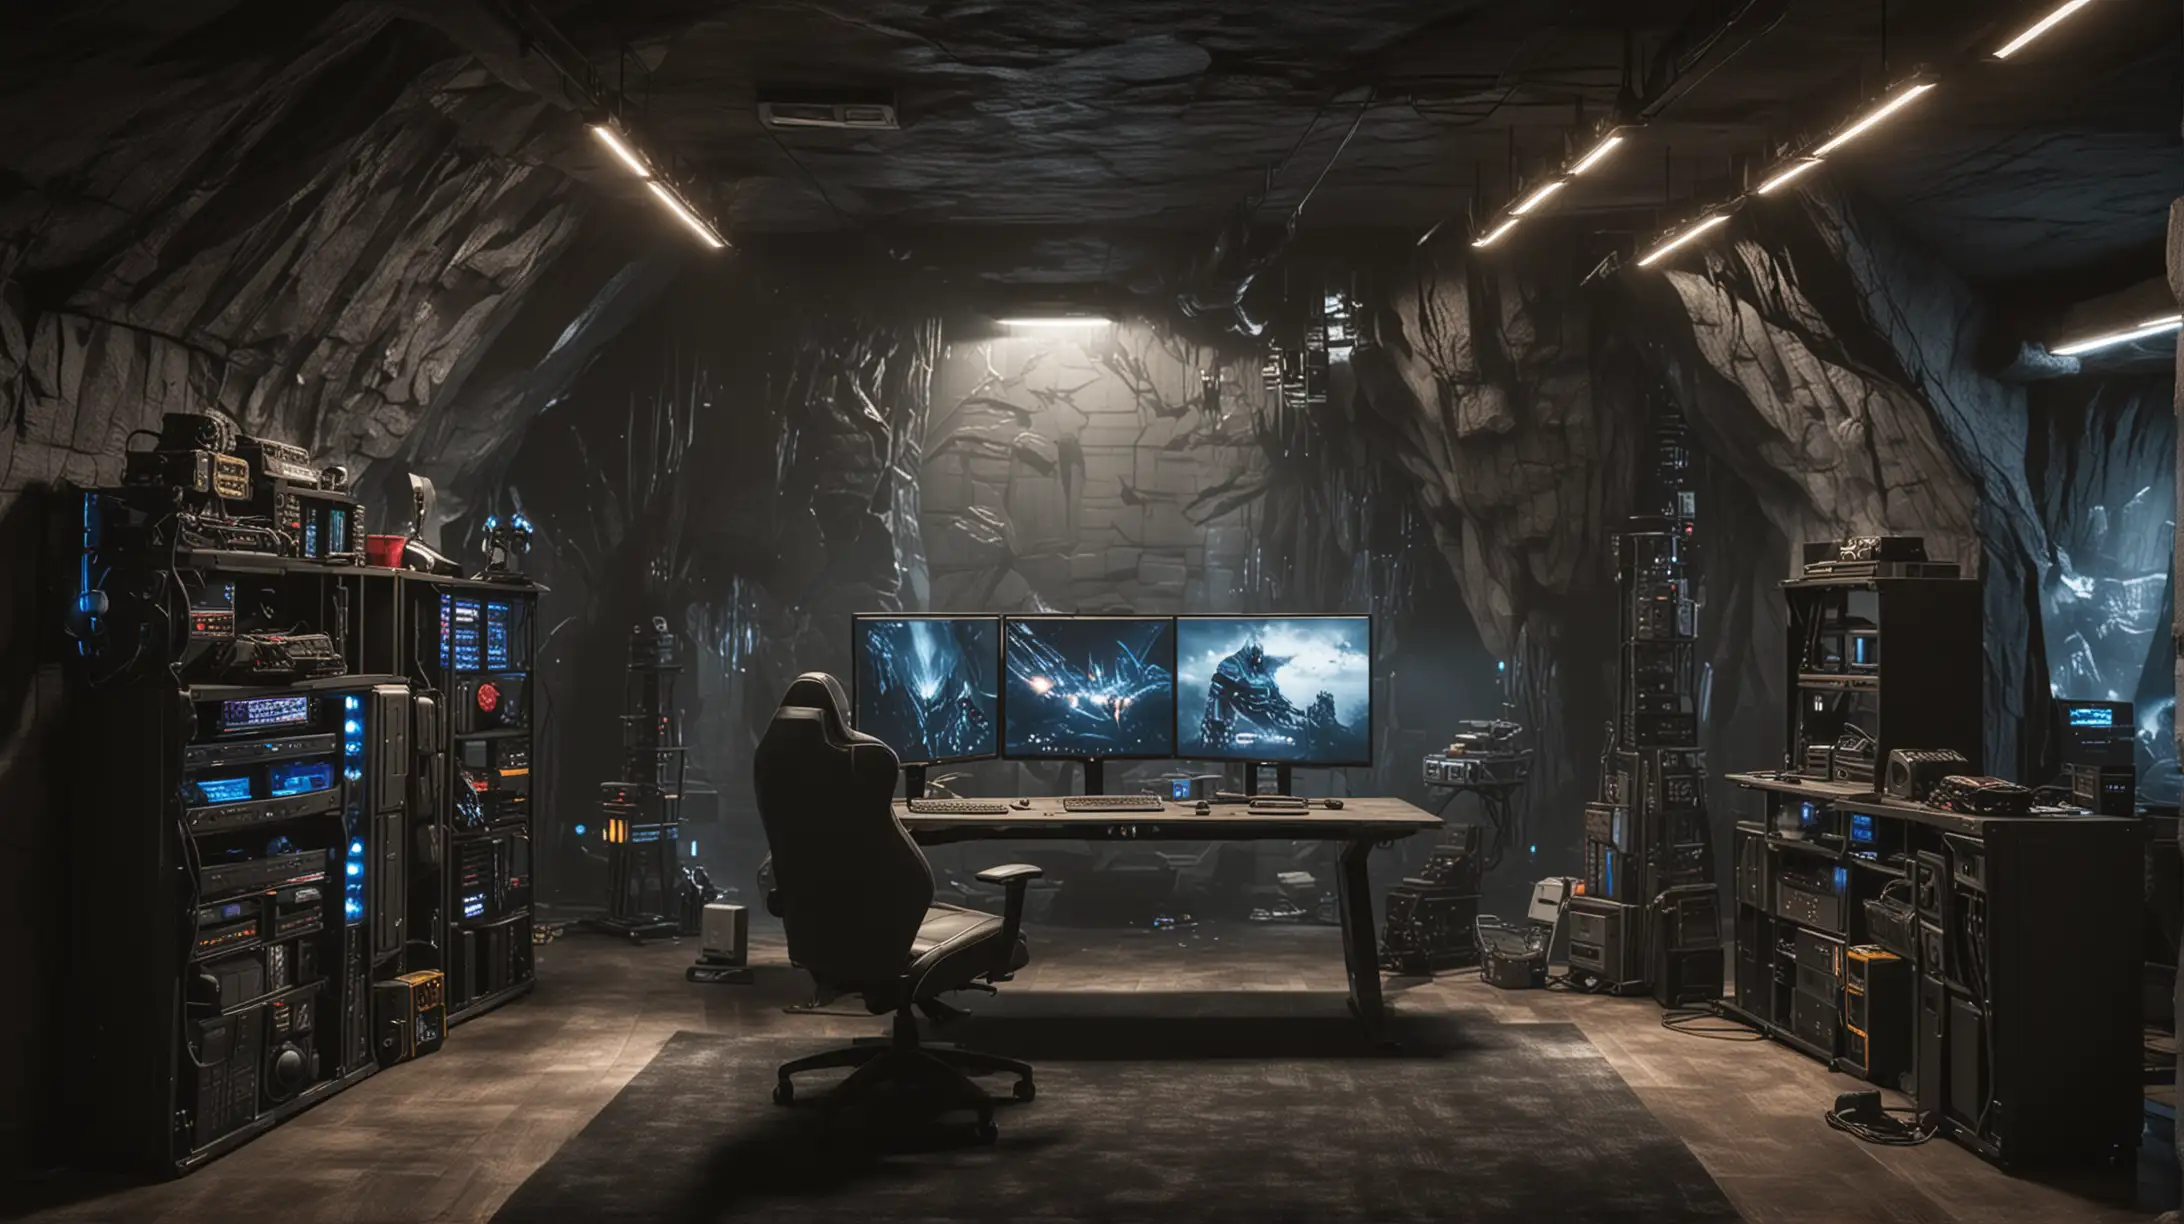 Sophisticated Batcave-inspired computer gaming setup